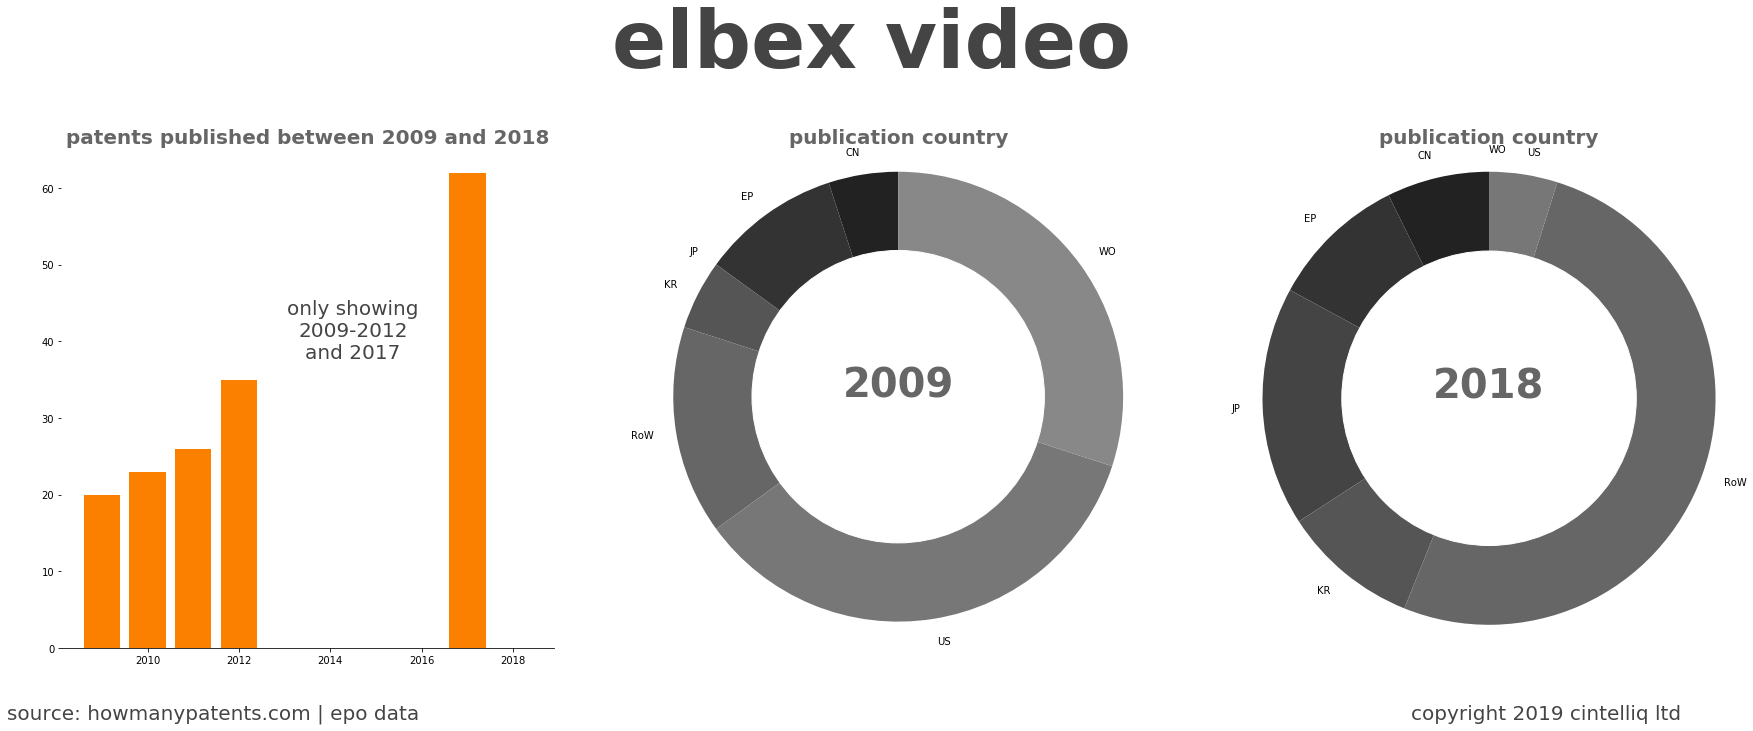 summary of patents for Elbex Video